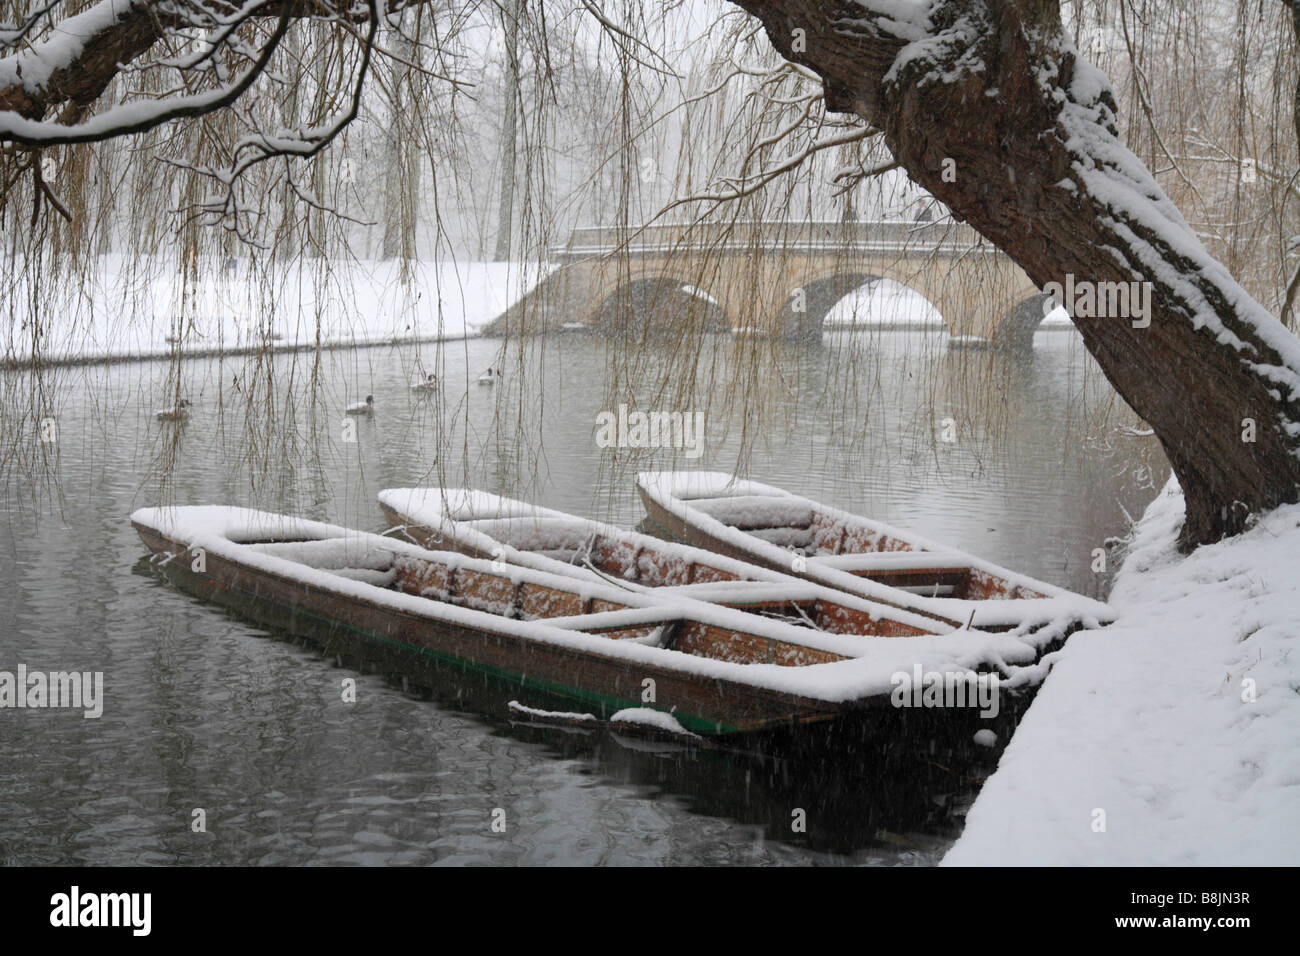 Snow on three 'Trinity College Punts' on the river cam, Cambridge. Heavy snow shower in January. Stock Photo